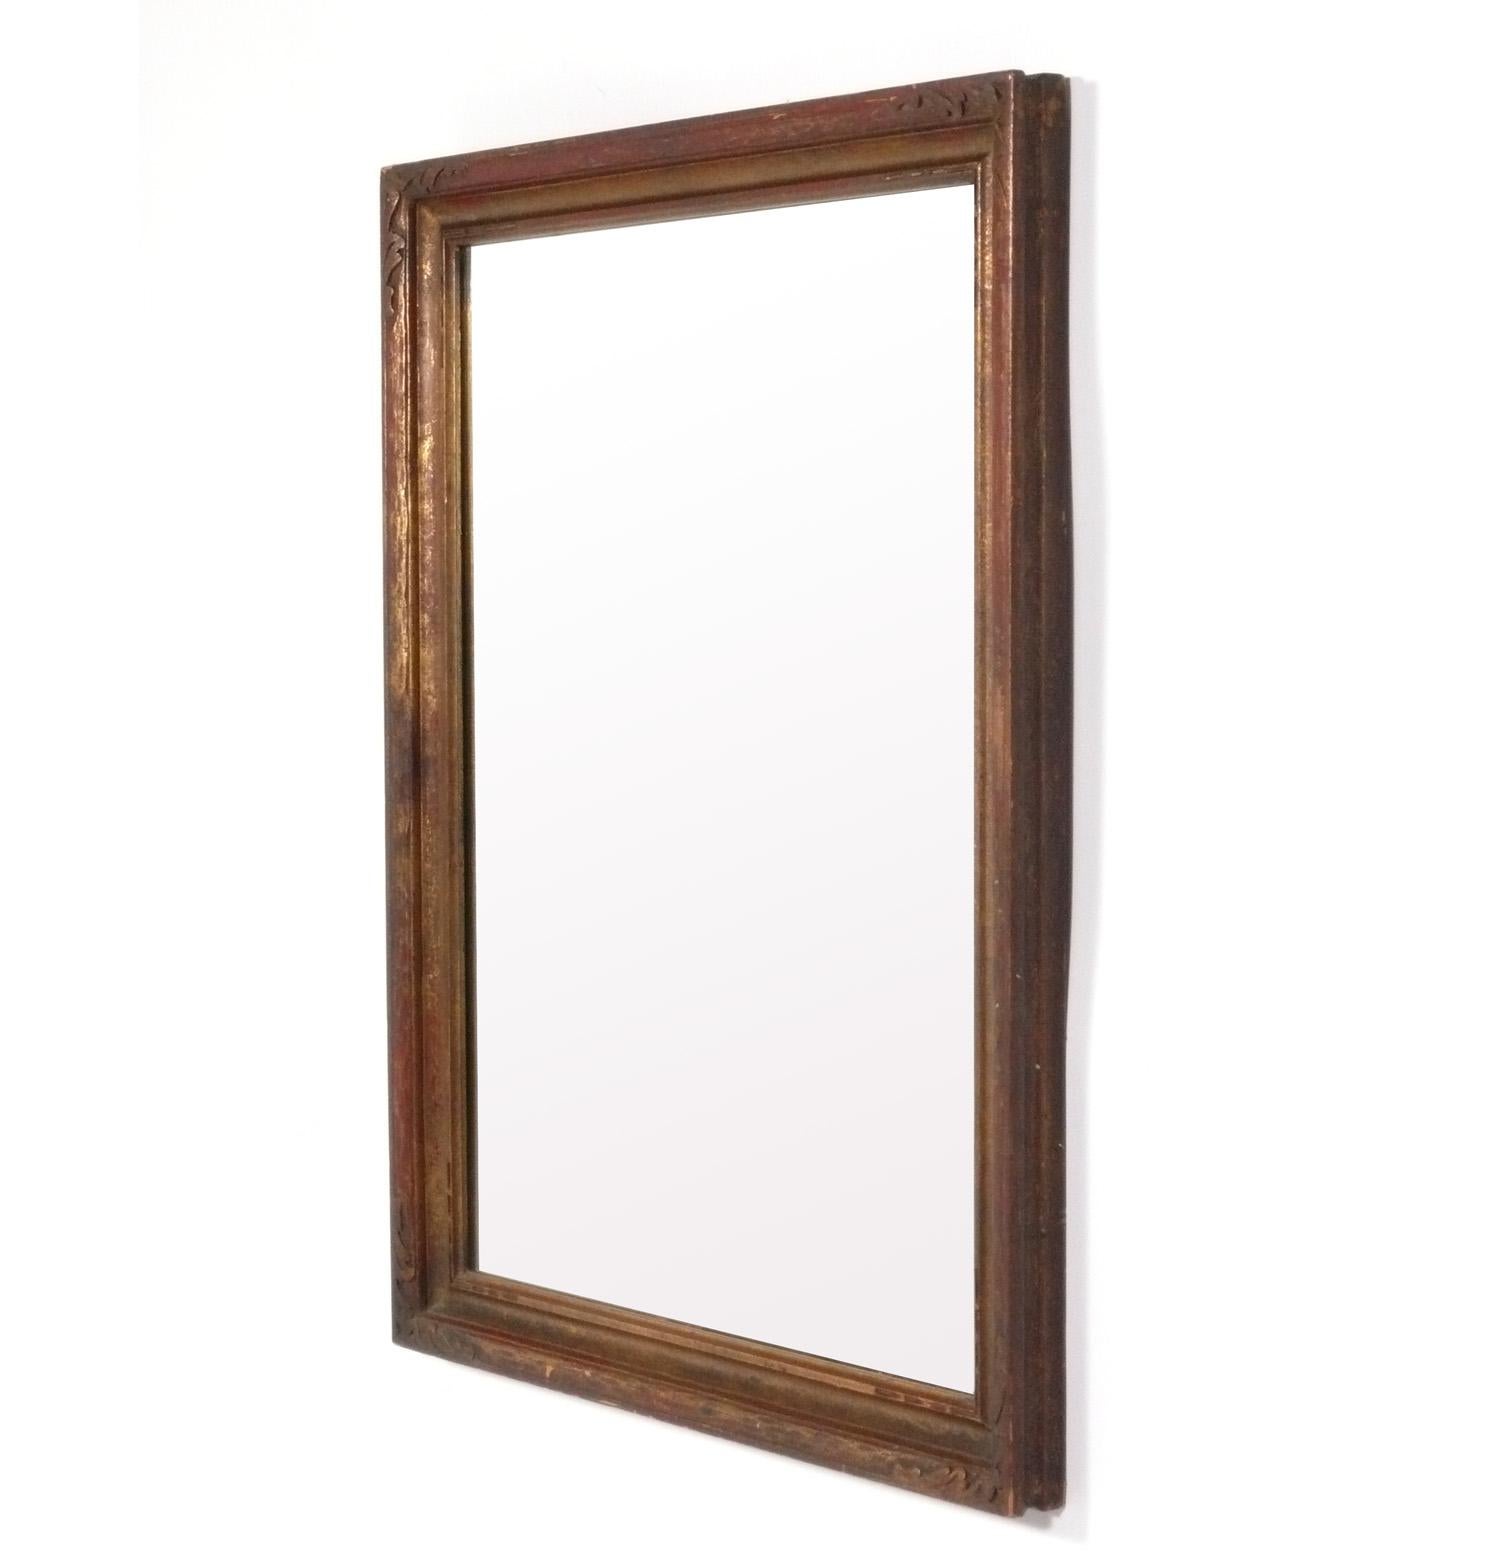 Gilt Italian mirror, recently removed from the famed Carlyle Hotel in NYC, originally from Italy, circa 1960s. It retains its original warm patina to both the gilt wood frame and the original mirror.